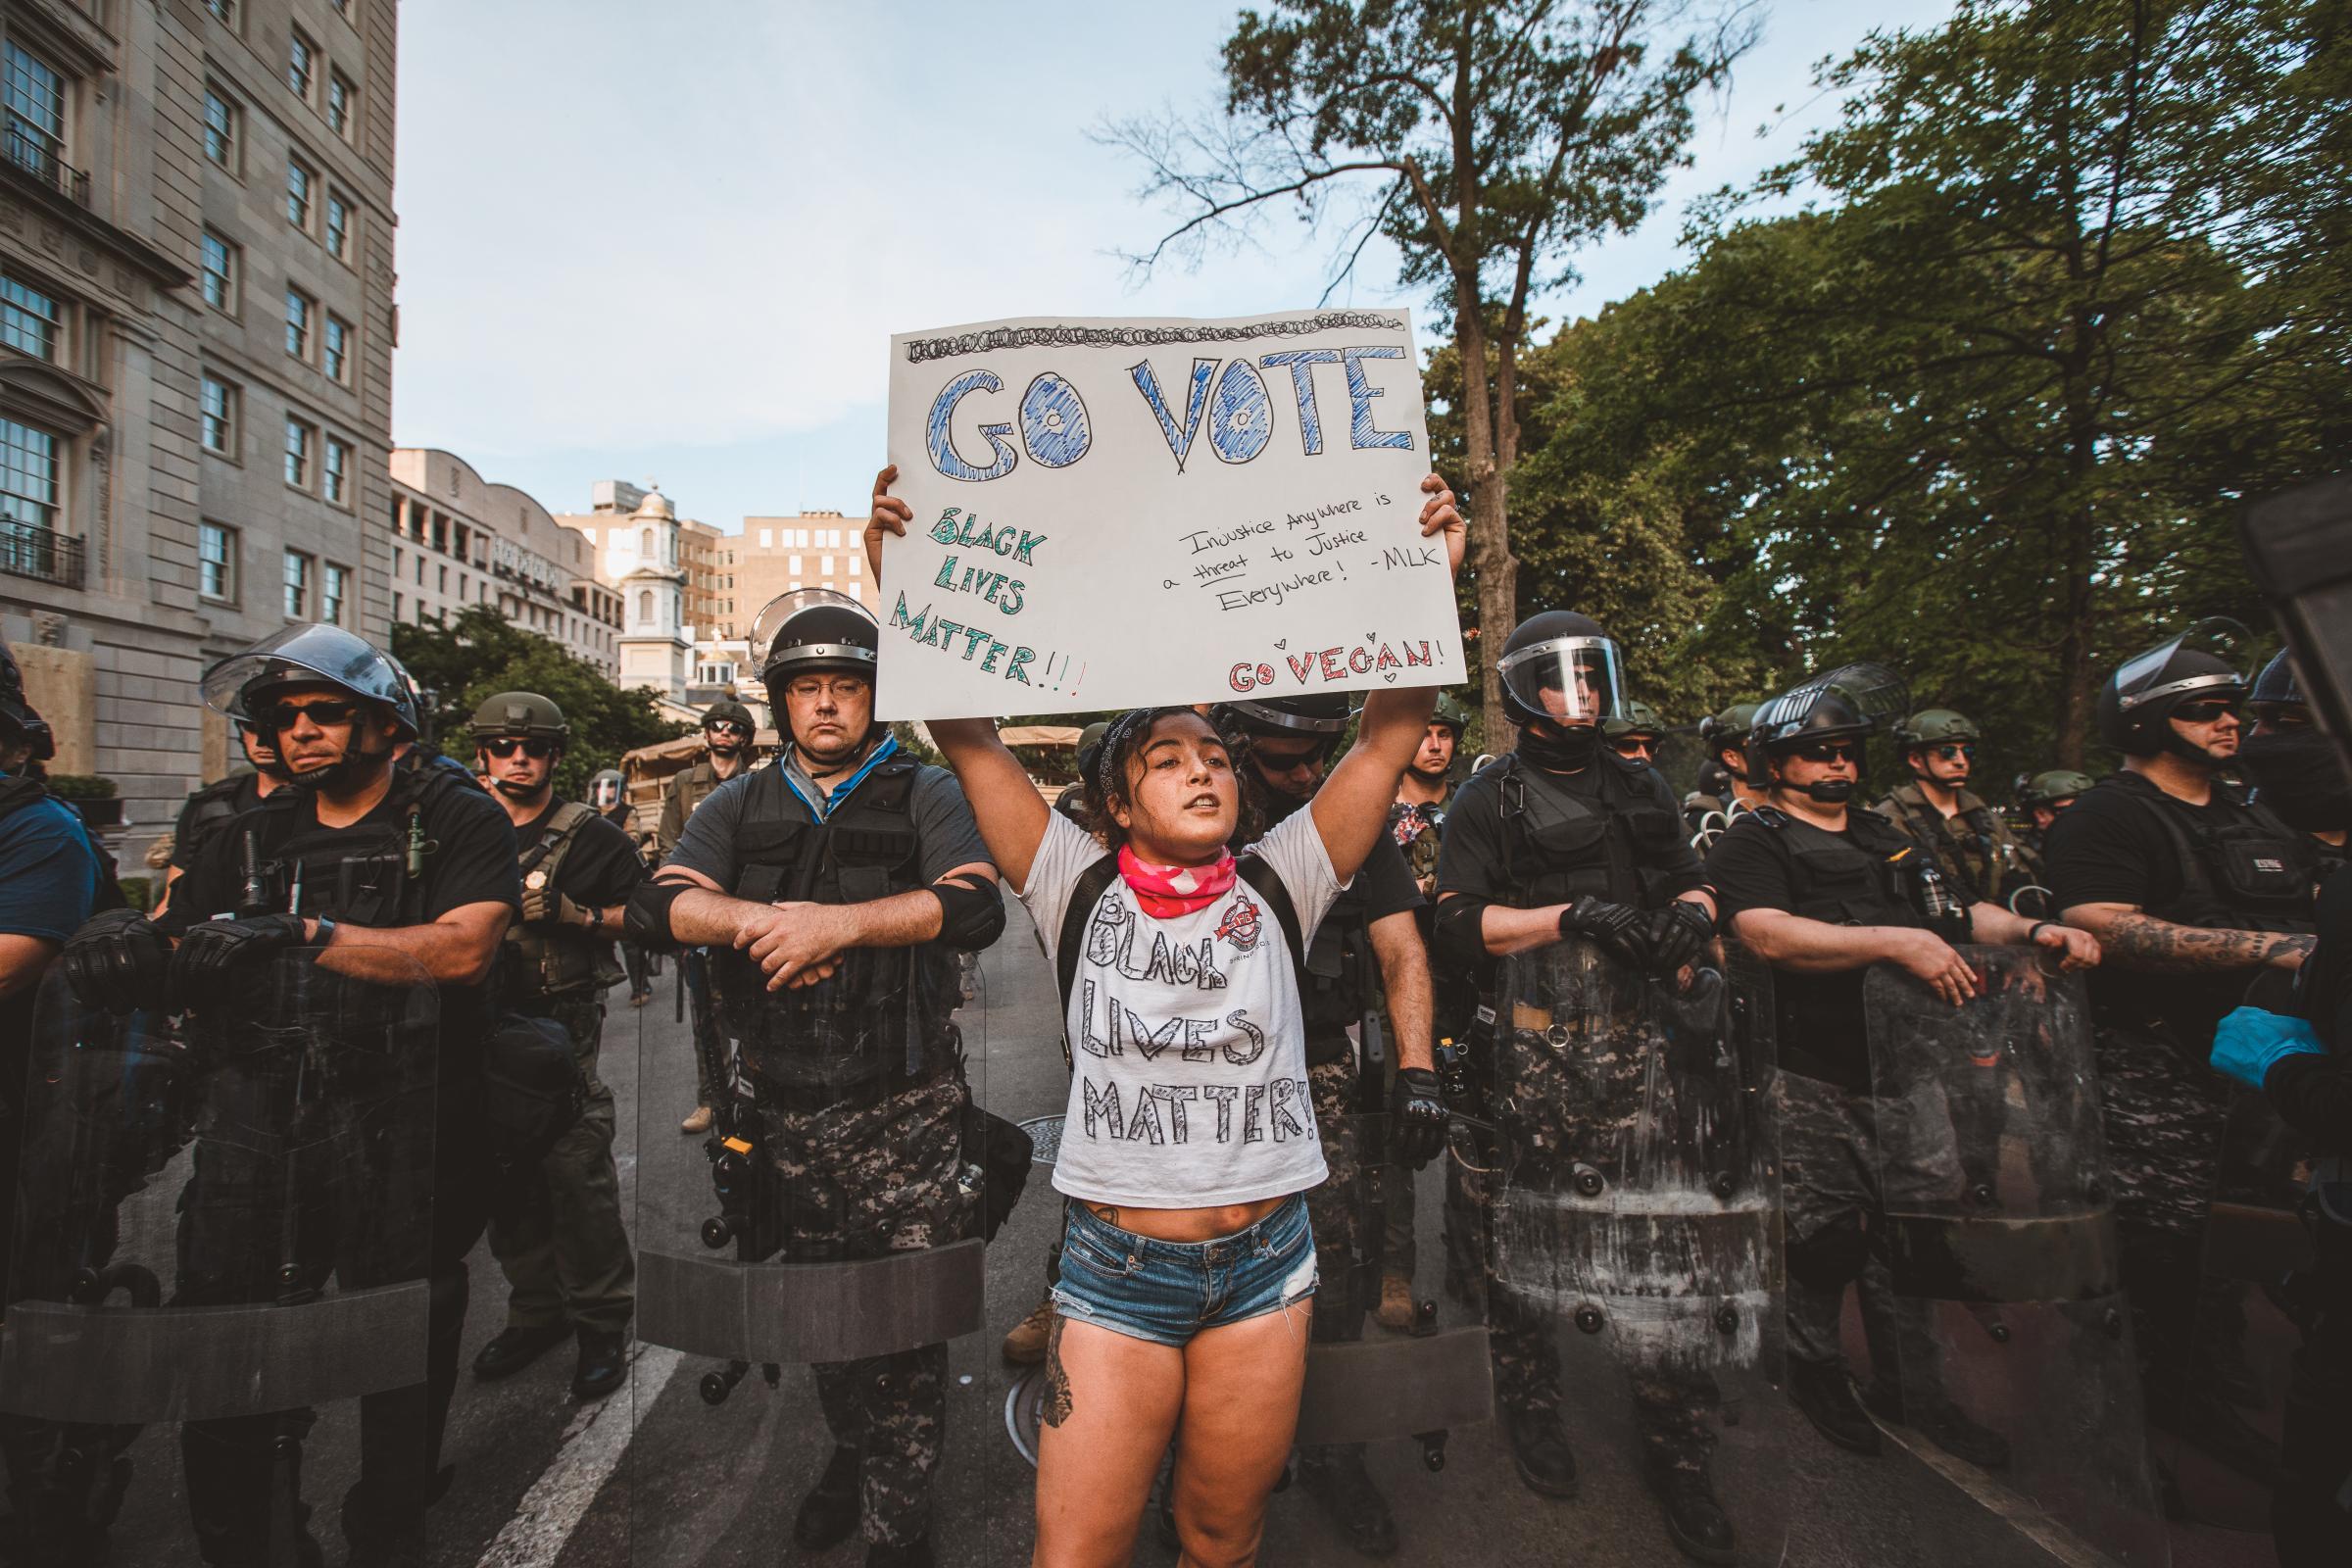 WASHINGTON D.C., A demonstrator holding a sign that reads &ldquo;Go Vote&rdquo; during a...